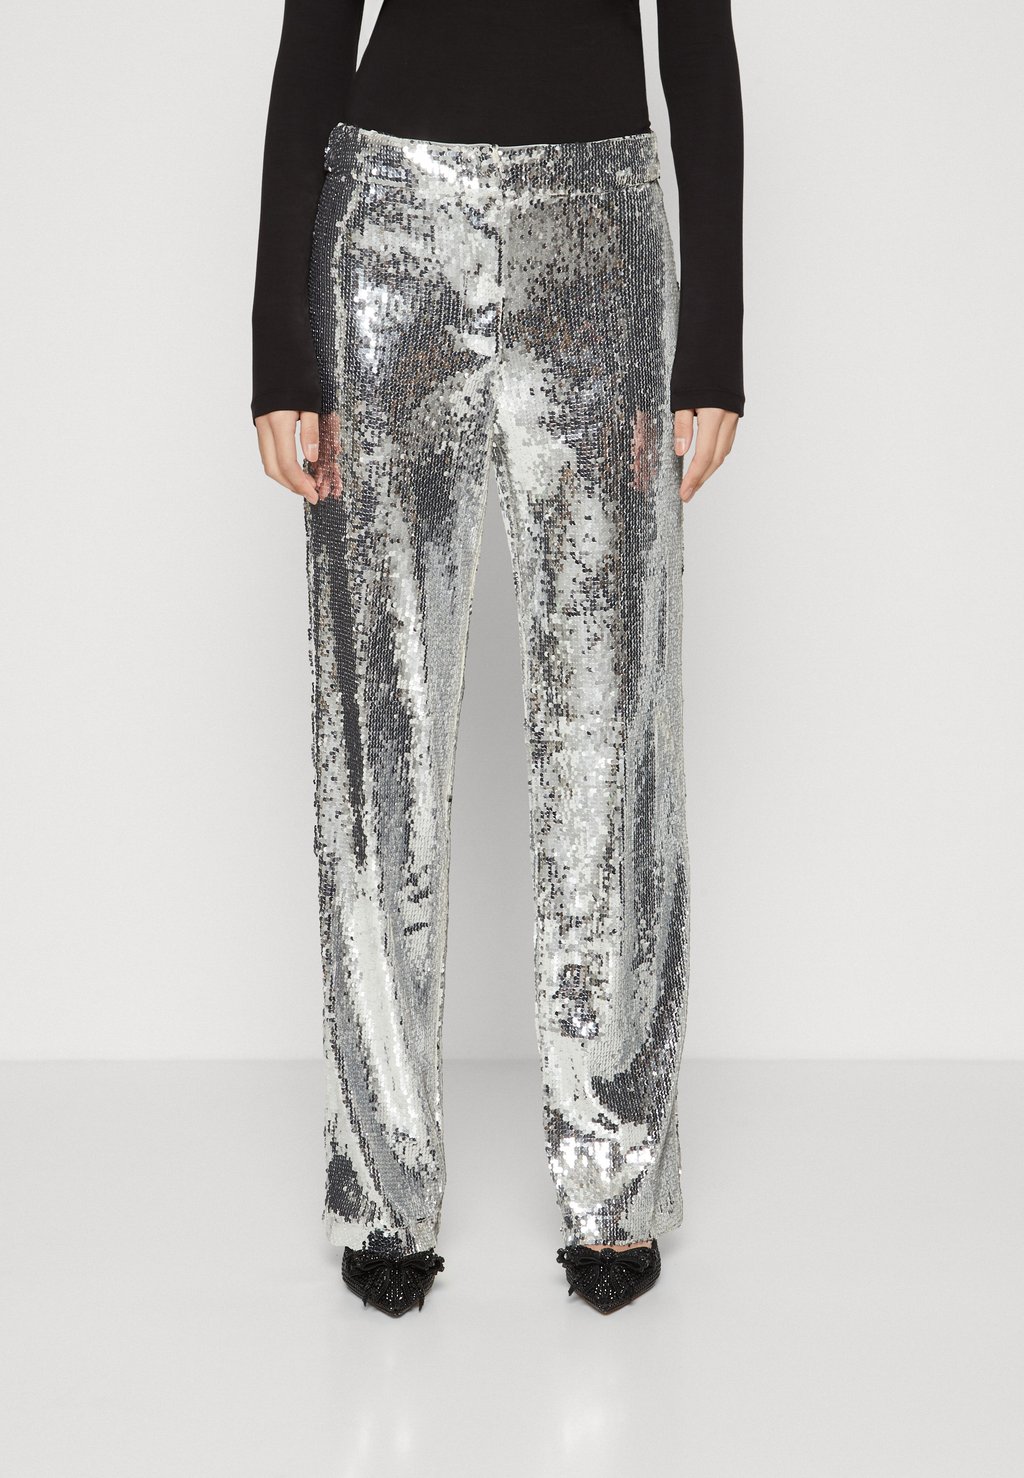 Брюки SILVER SEQUIN TROUSERS Gina Tricot, цвет silver браслет gina unholy silver 1 шт